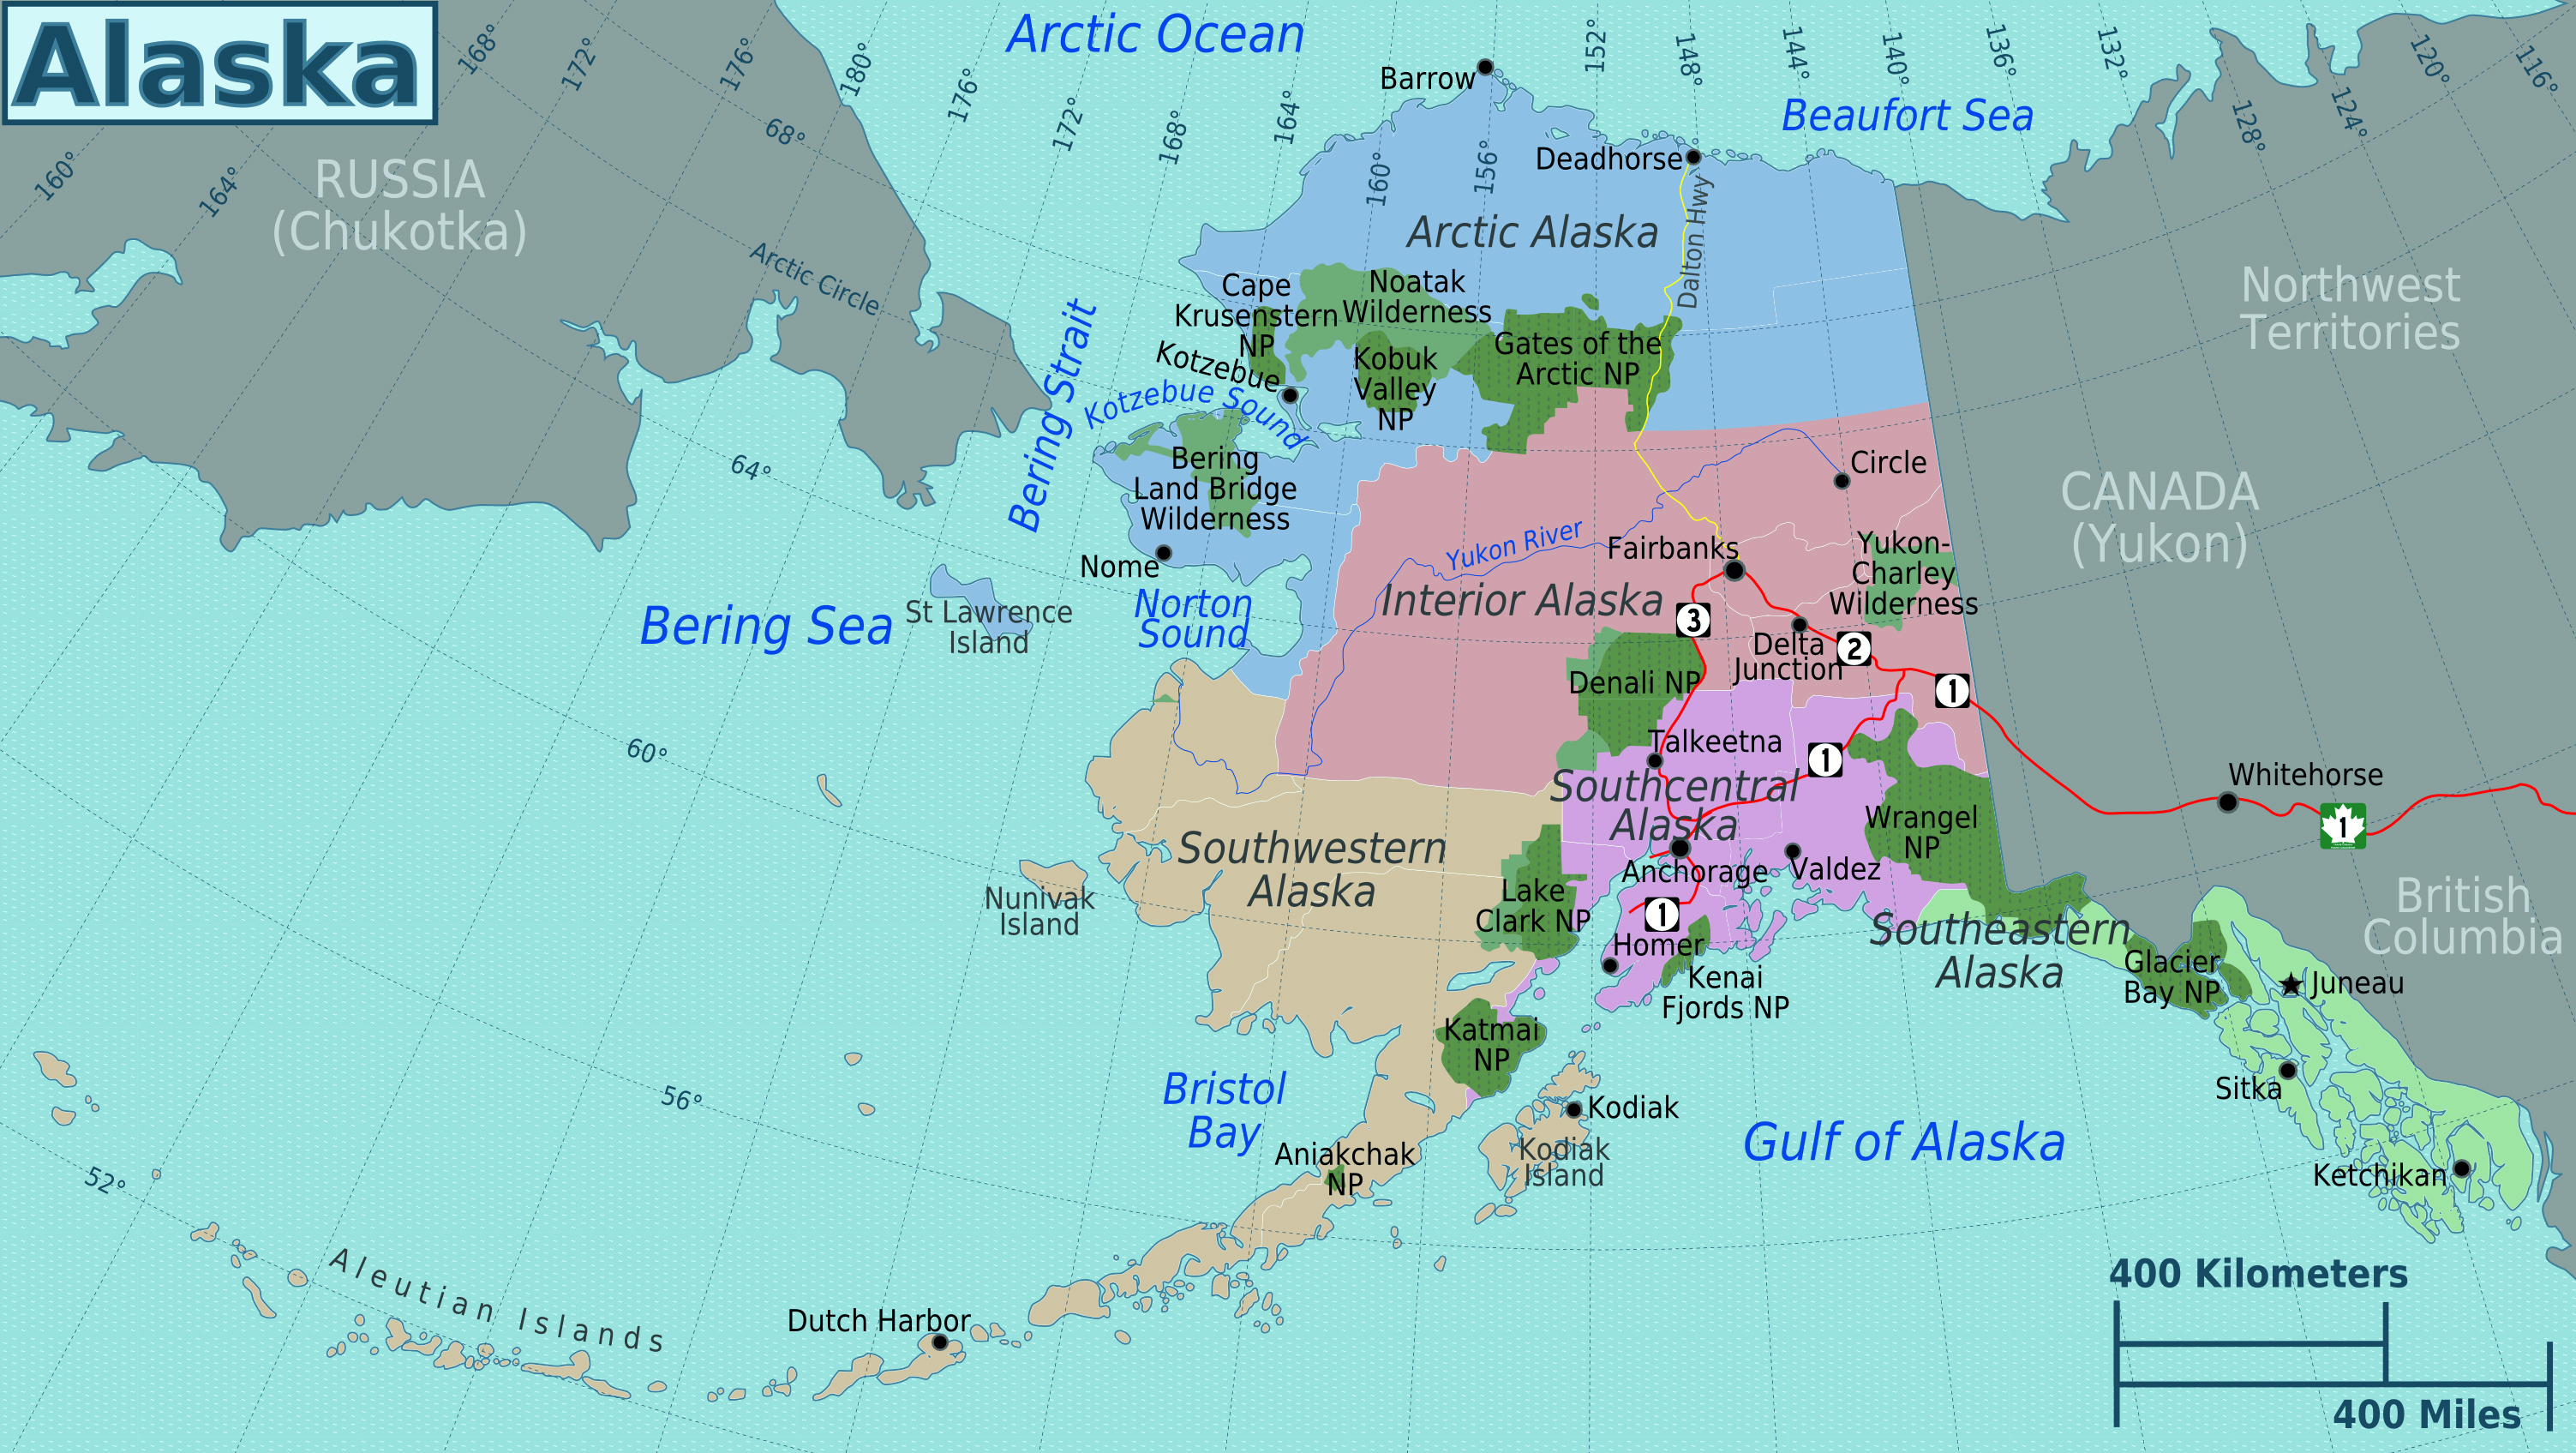 Large regions map of Alaska state | Alaska state | USA | Maps of the